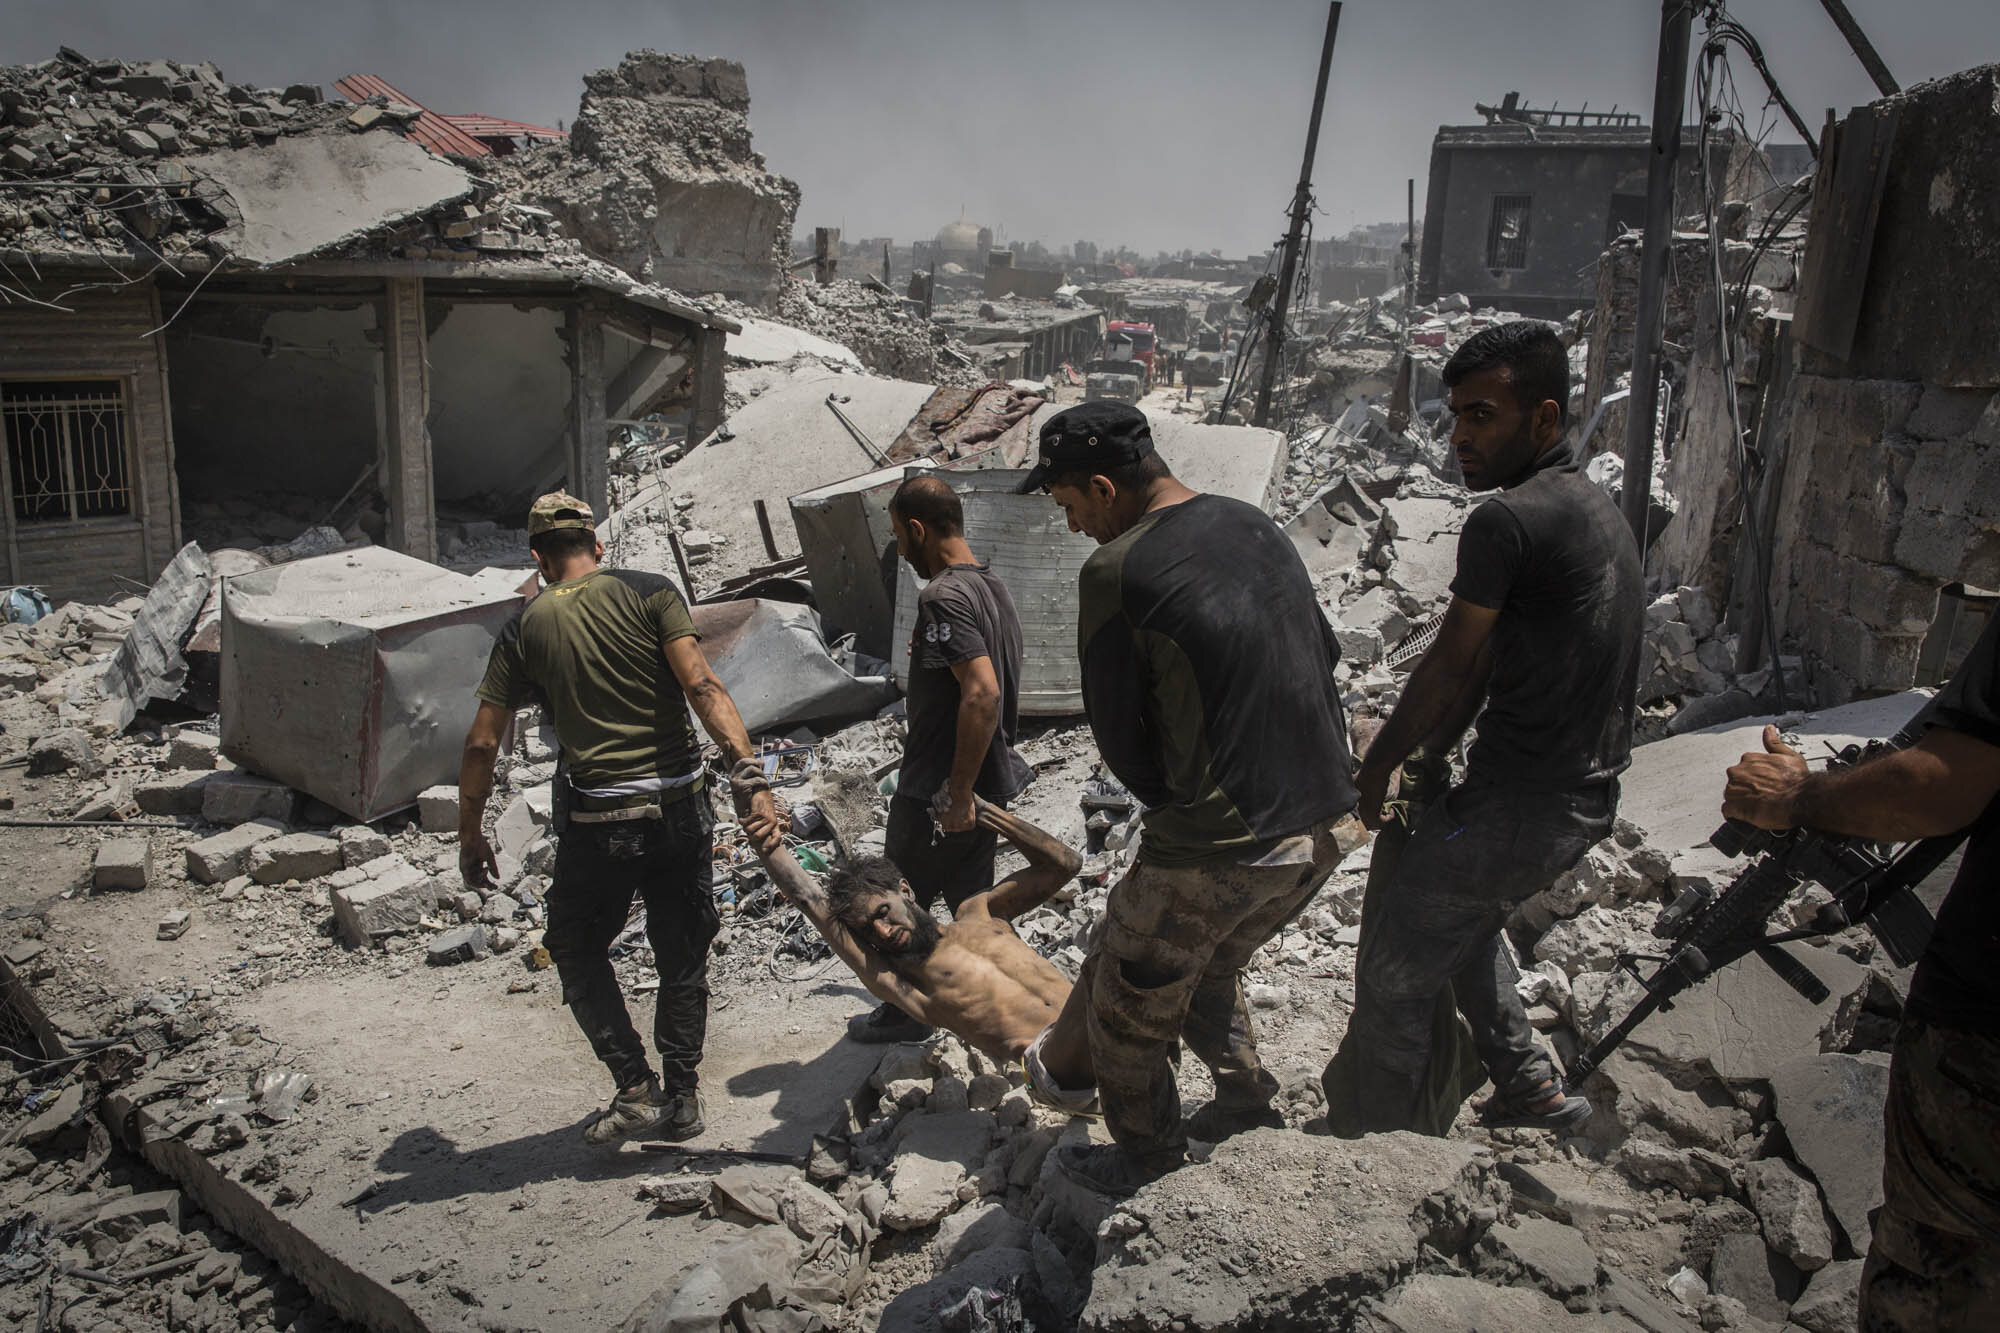  Iraqi special forces soldiers carried away an injured ISIS fighter who had surrendered, moments after they dragged him out of the basement of a destroyed building in the Maydan area of Mosul’s Old City. Iraq - July 2017 